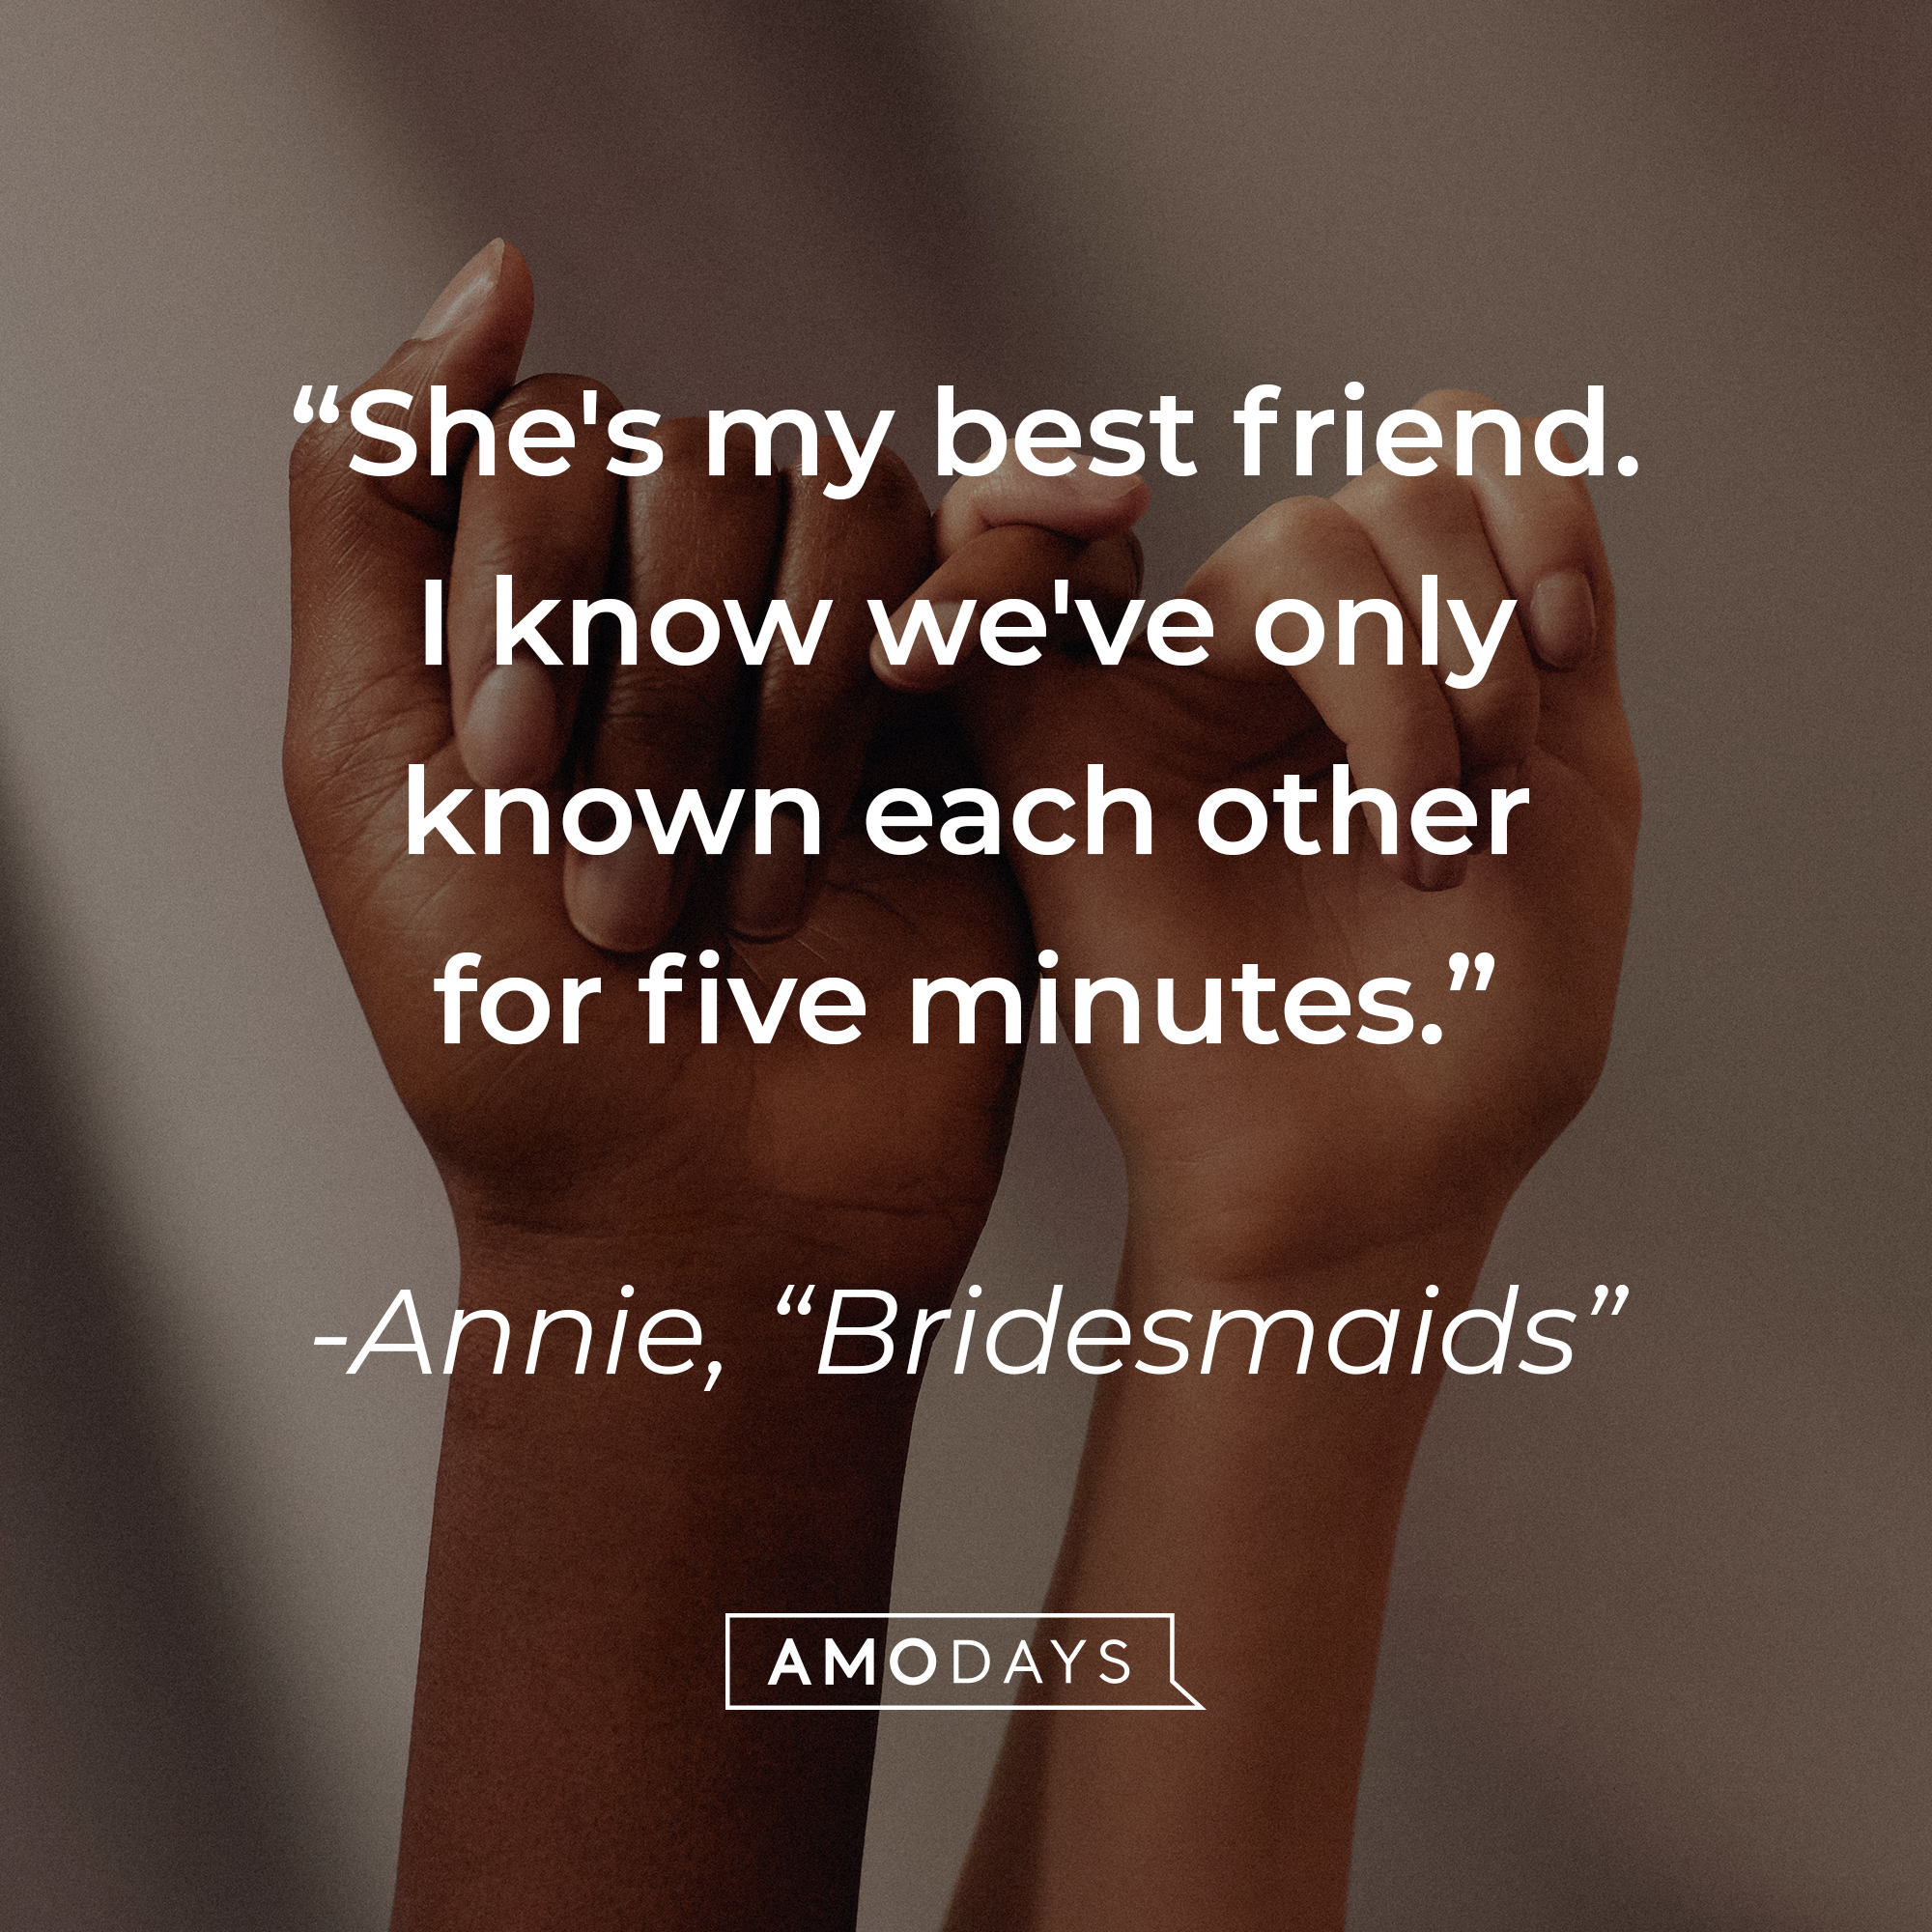 Annie's quote: "She's my best friend. I know we've only known each other for five minutes." — "Bridesmaids" | Source: Unsplash